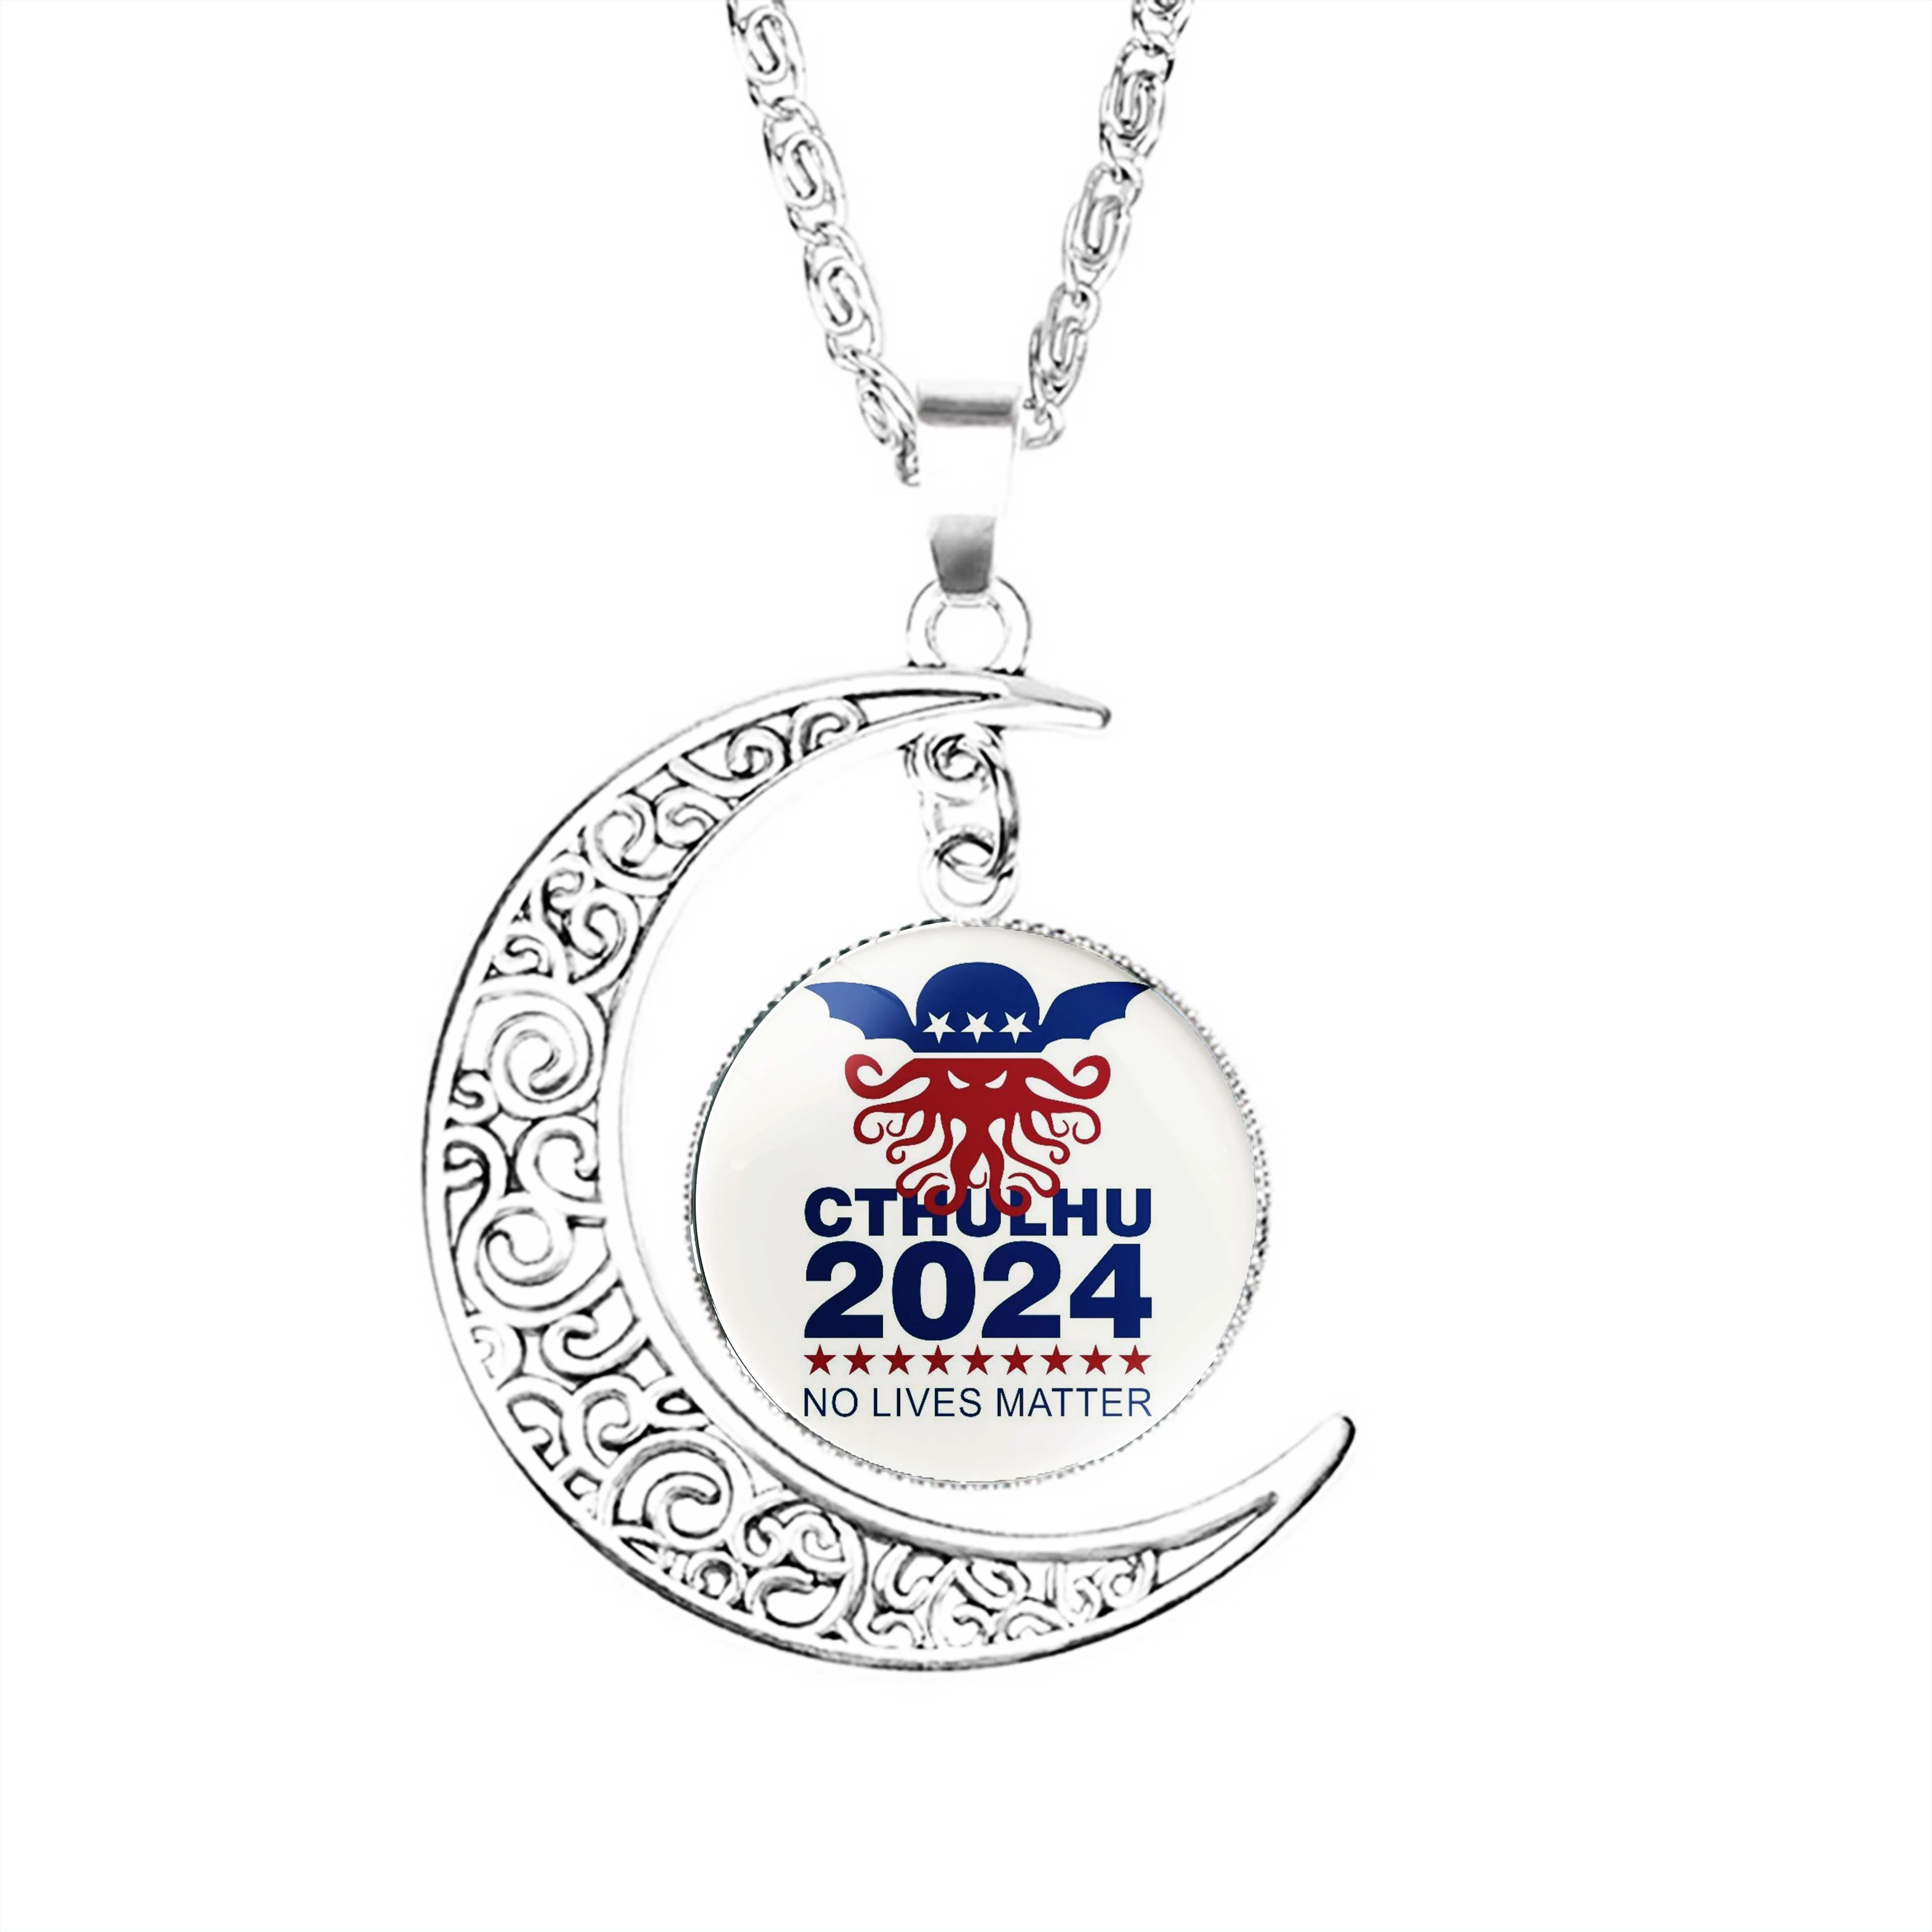 Cthulhu 2024 No Lives Matter  Moon Necklace Boy Men Fashion Crescent Gifts Girls Accessories Party Charm Women Lovers Lady Dome